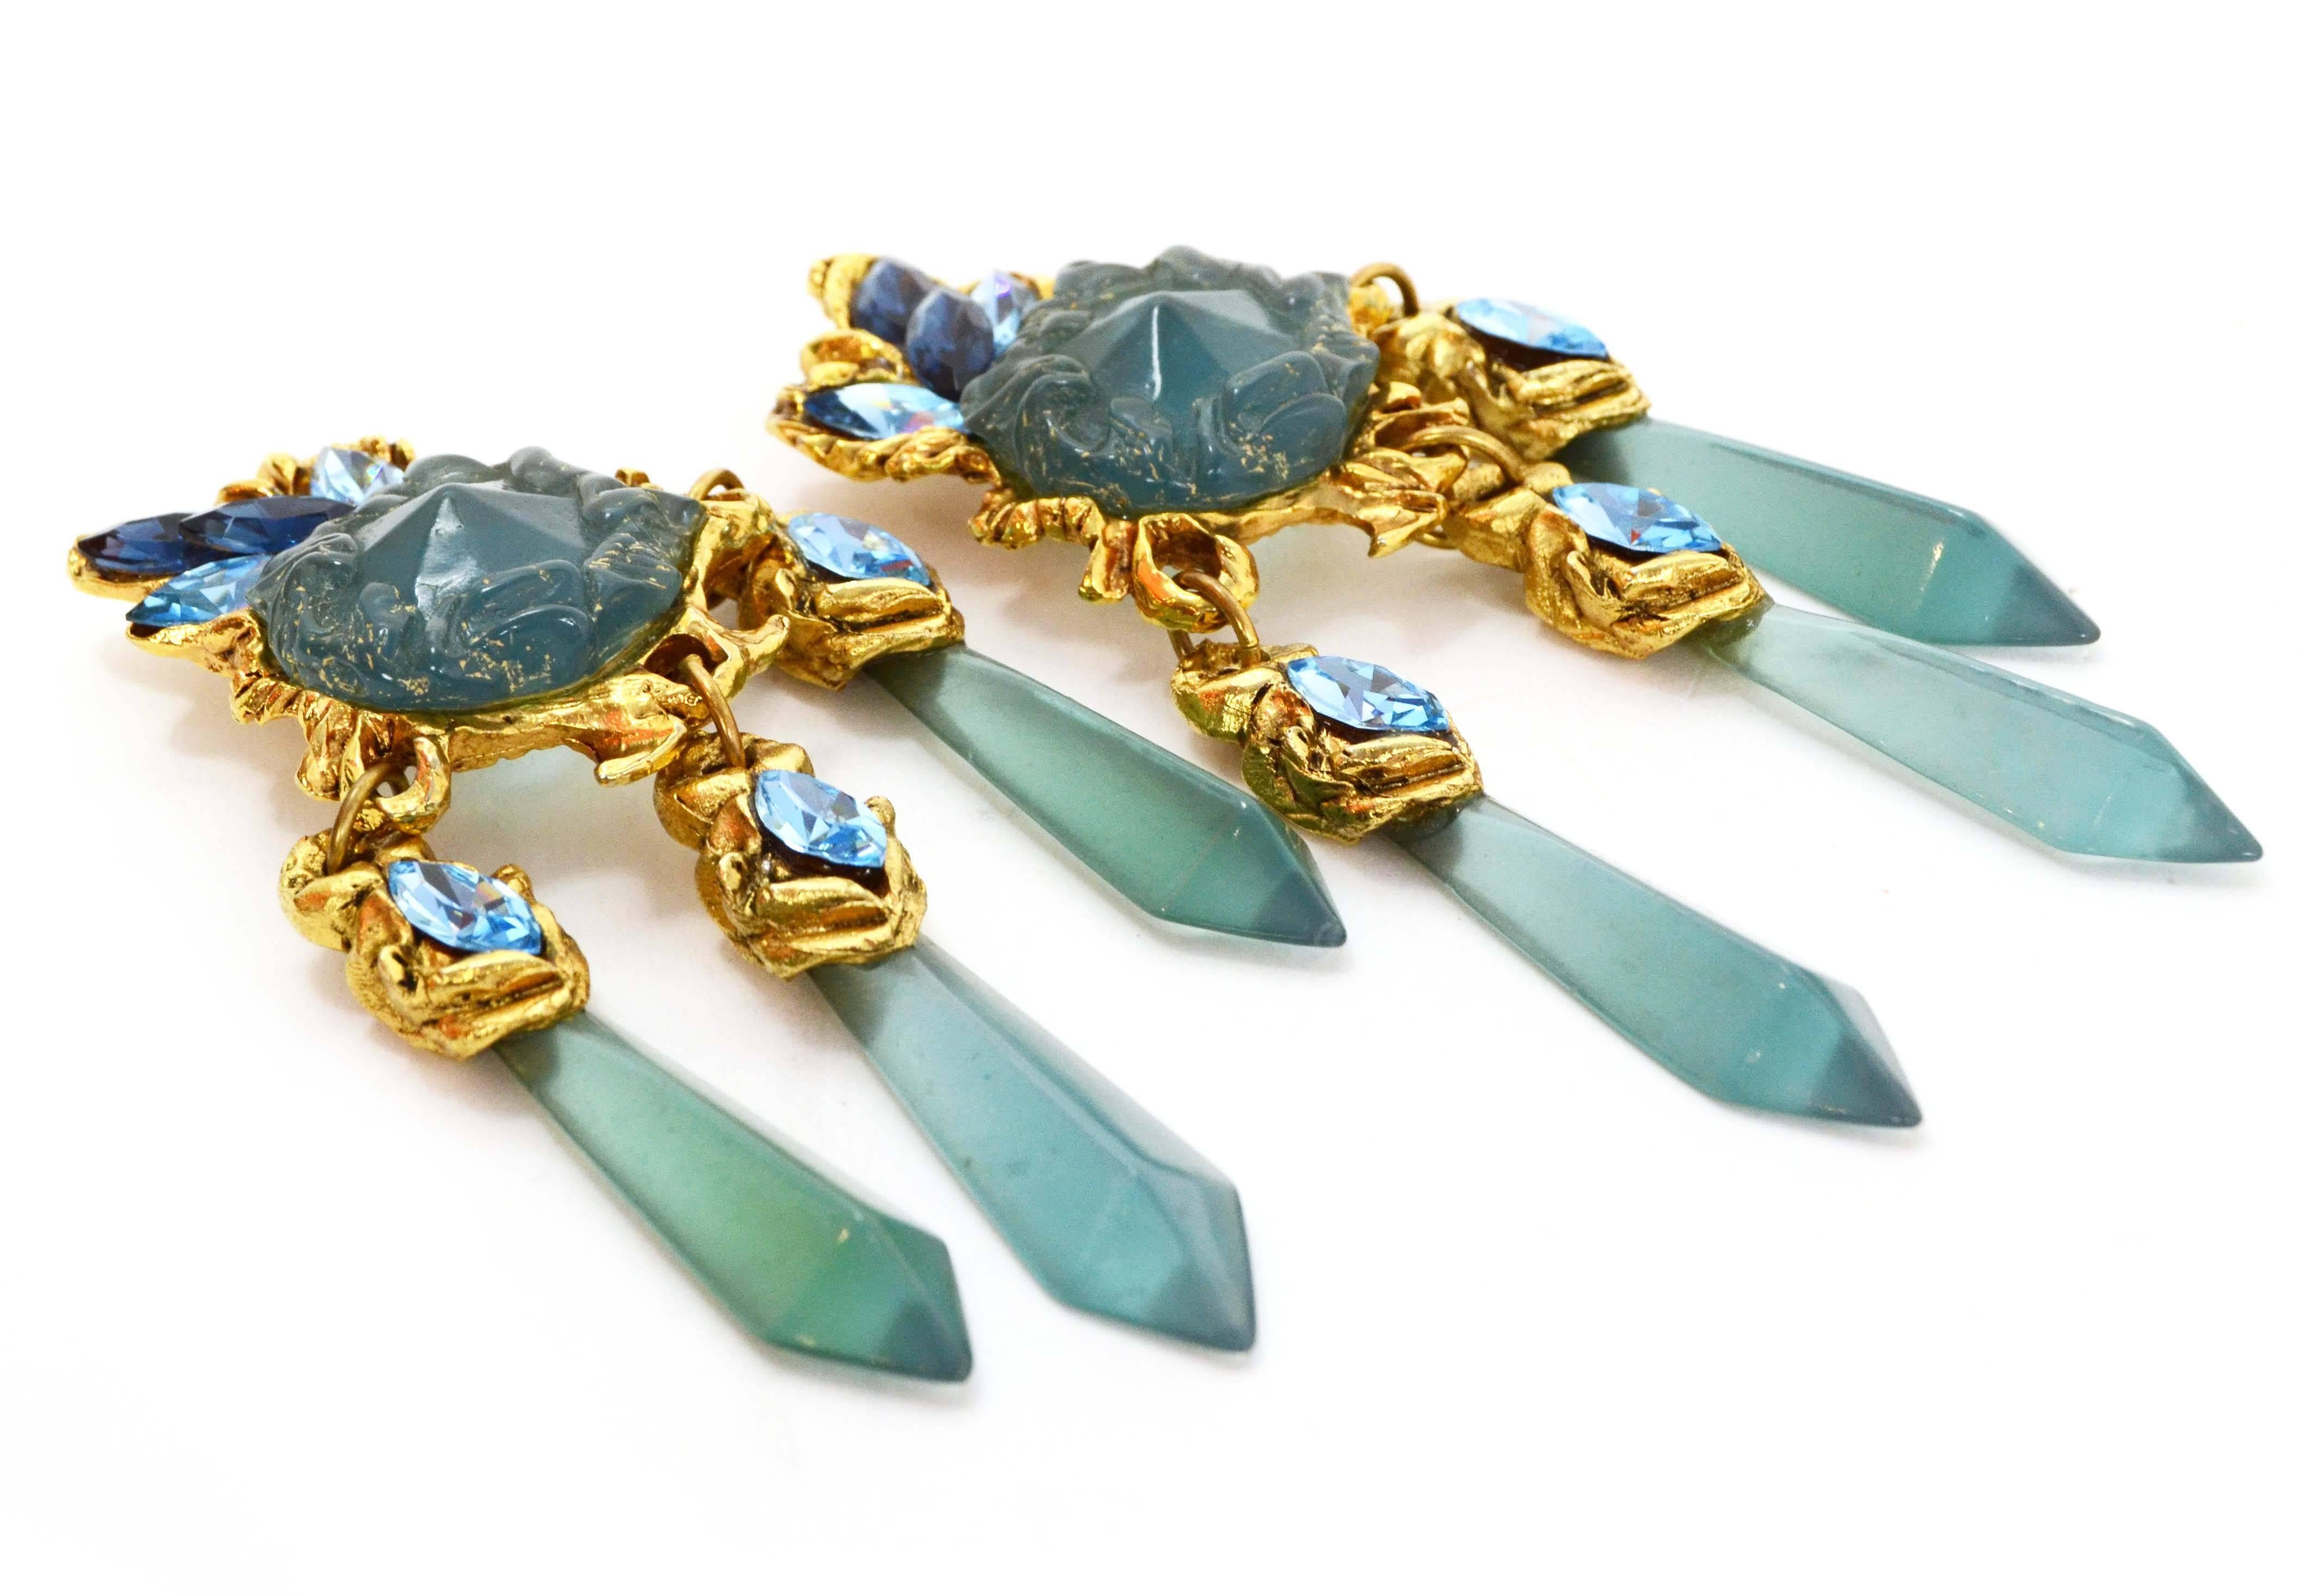 Blue Stone & Crystal Chandelier Clip On Earrings 
Features multiple shades of blue crystals and stones
Color: Blue and goldtone
Materials: Metal and stone
Closure: Clip on
Overall Condition: Excellent pre-owned condition
Measurements: